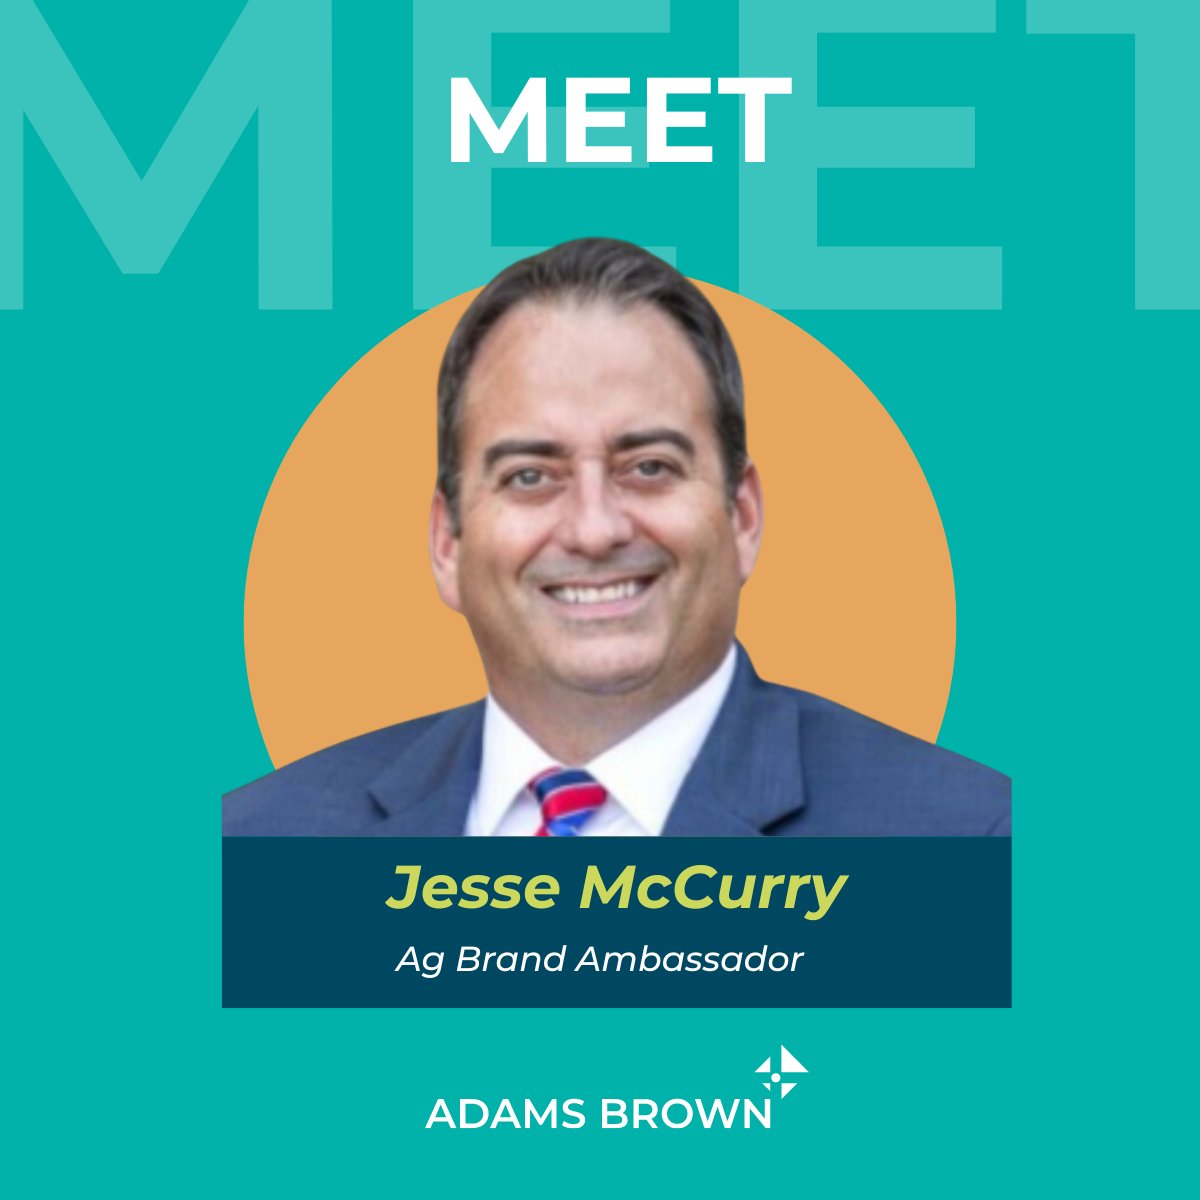 Learn more about Jesse McCurry who recently joined Adams Brown as the Ag Brand Ambassador!  Jesse previously served as the Executive Director at Kansas Grain Sorghum.

>> hubs.la/Q02tyStp0

#agriculture #farming #Kansasfarmersg #farmer #farmowner